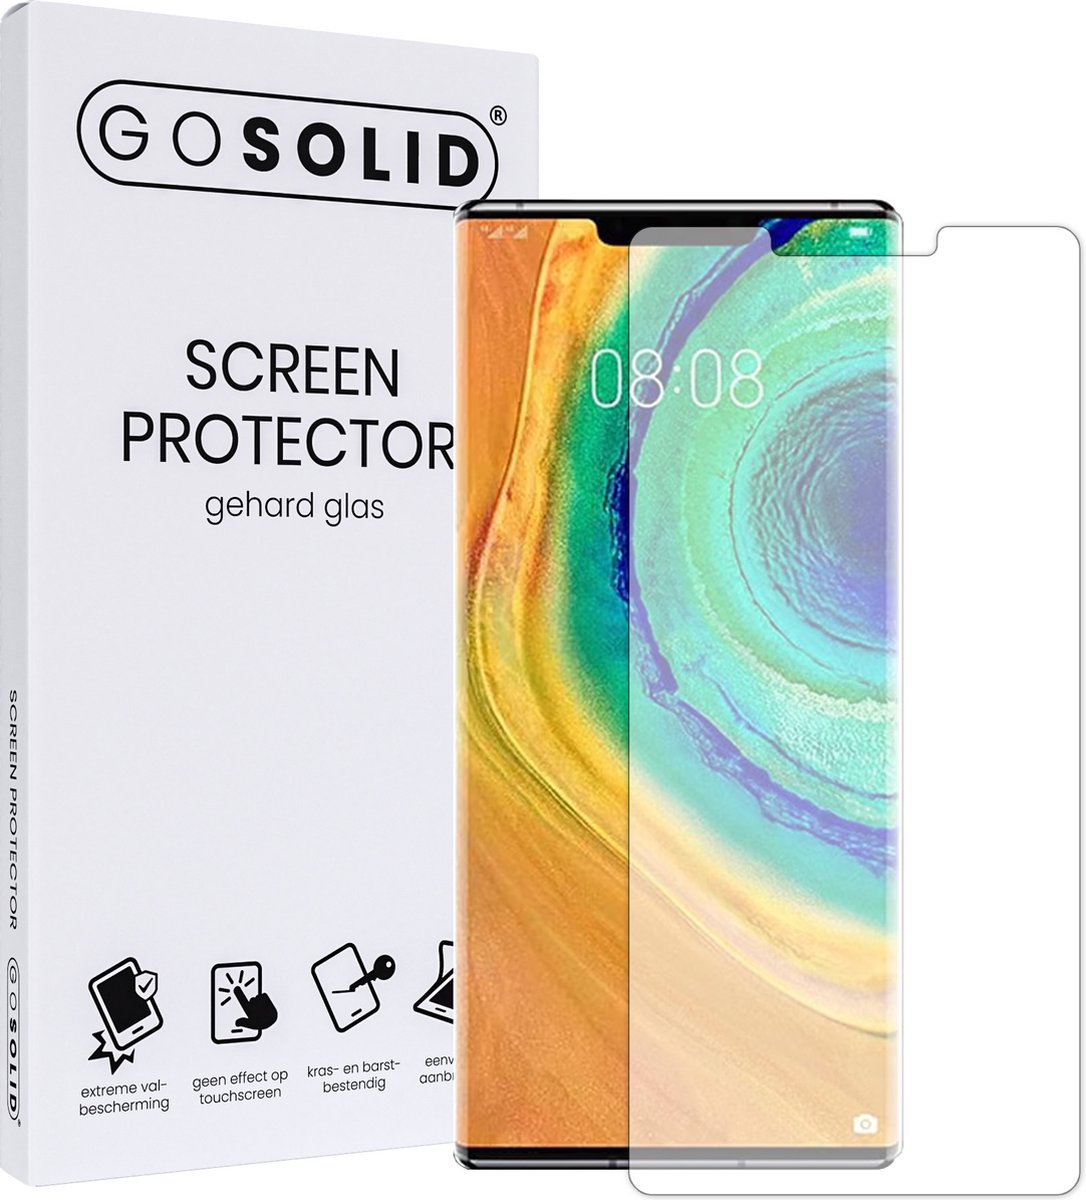 Go Solid! Screenprotector Voor Huawei Mate 30 E Pro 5g